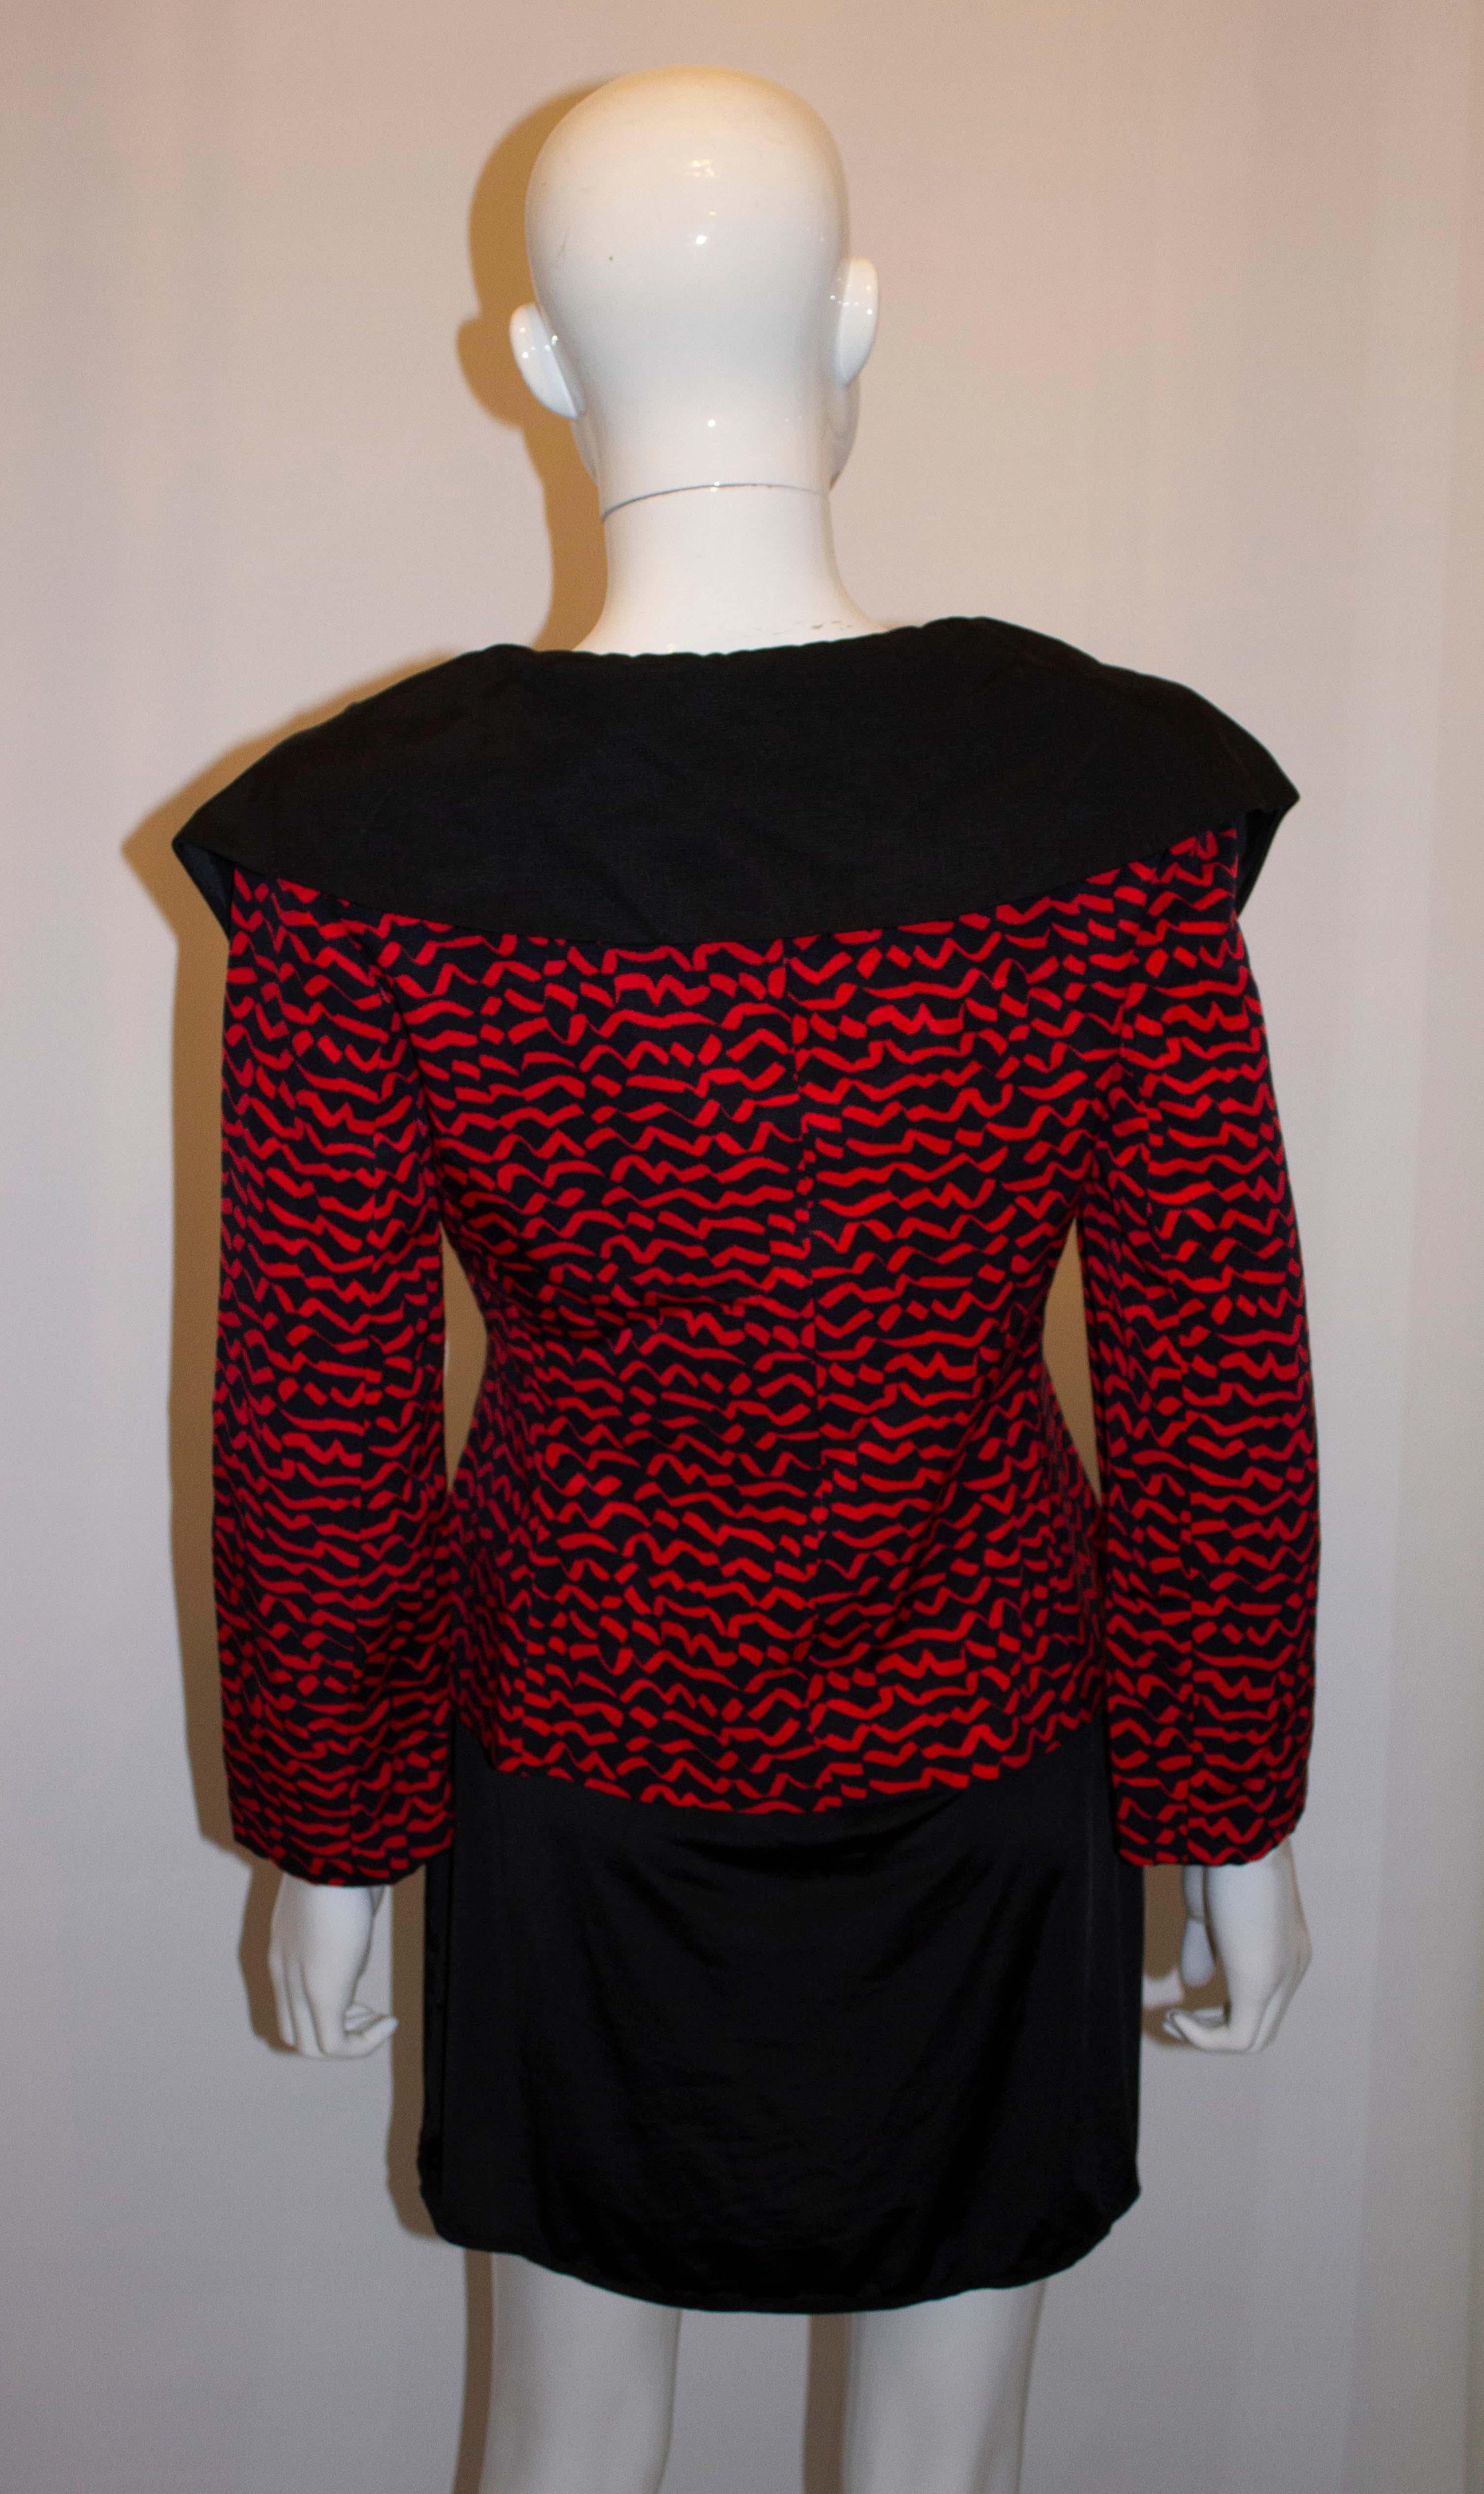 A fun vintage jacket by Benny Ong. The jacket is in a red and black mix with a wide black collar and re ribbon  detail. It is lined with a three button front fastening. 
Measurements: Bust 36'', length 23''